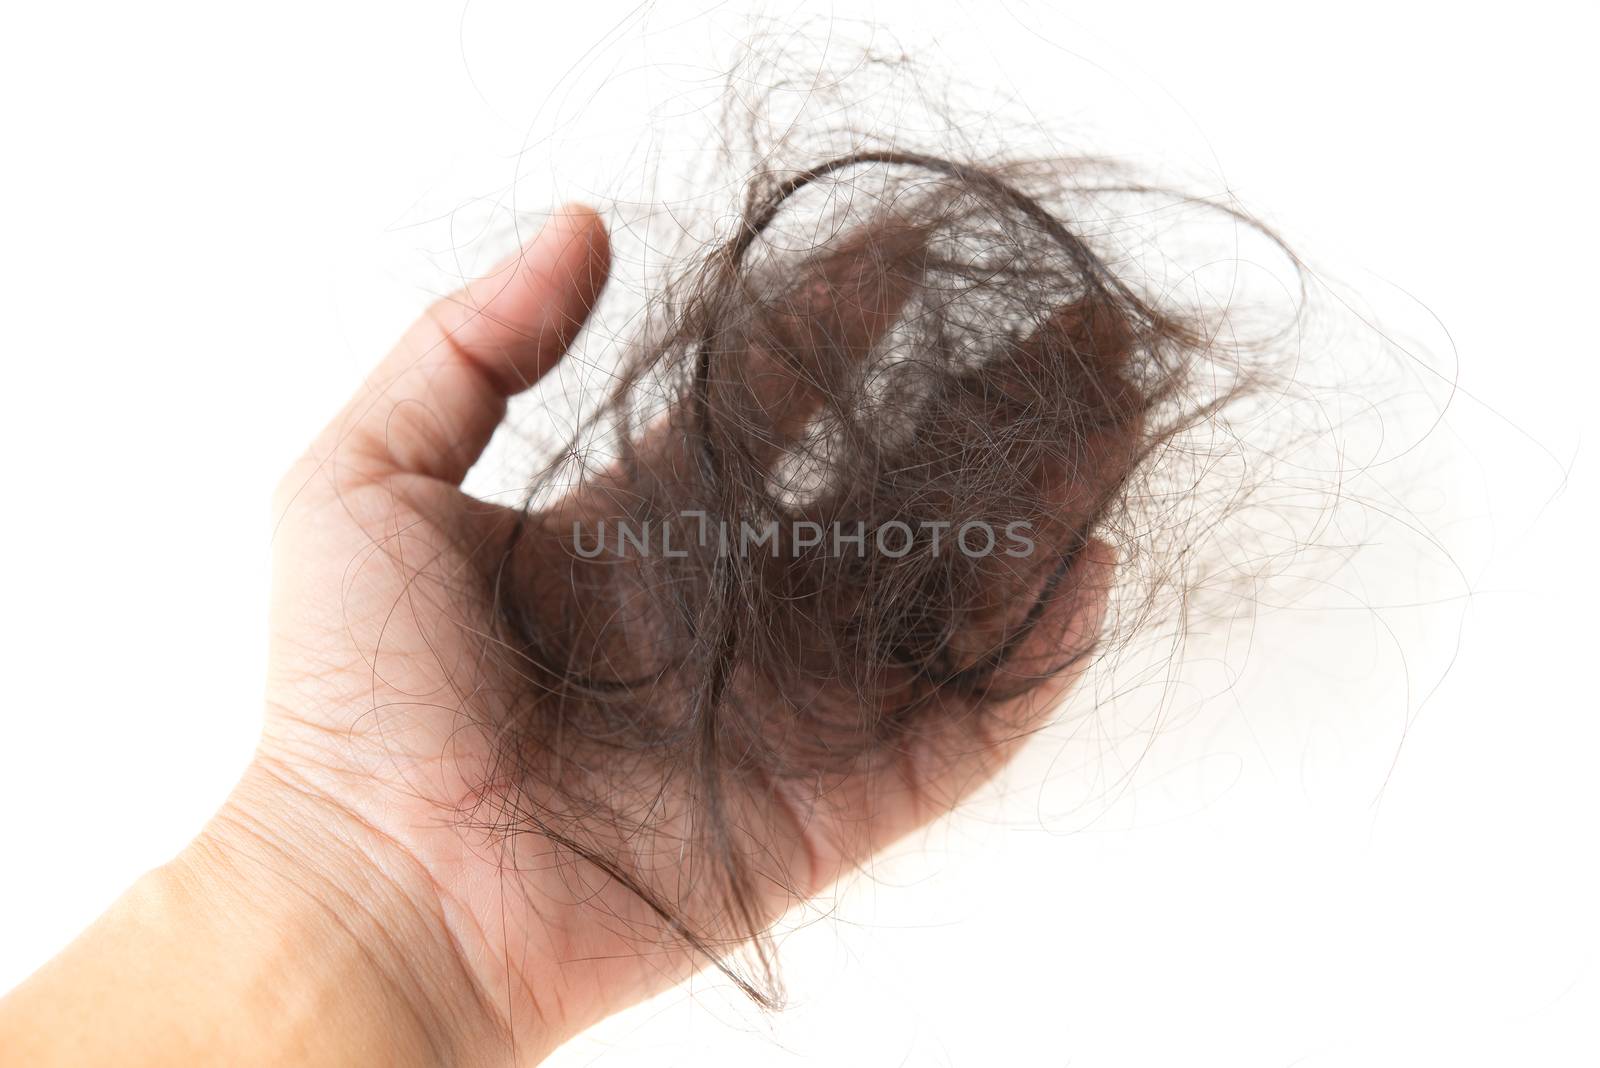 Human hand with lost hair on it, isolated on white background.